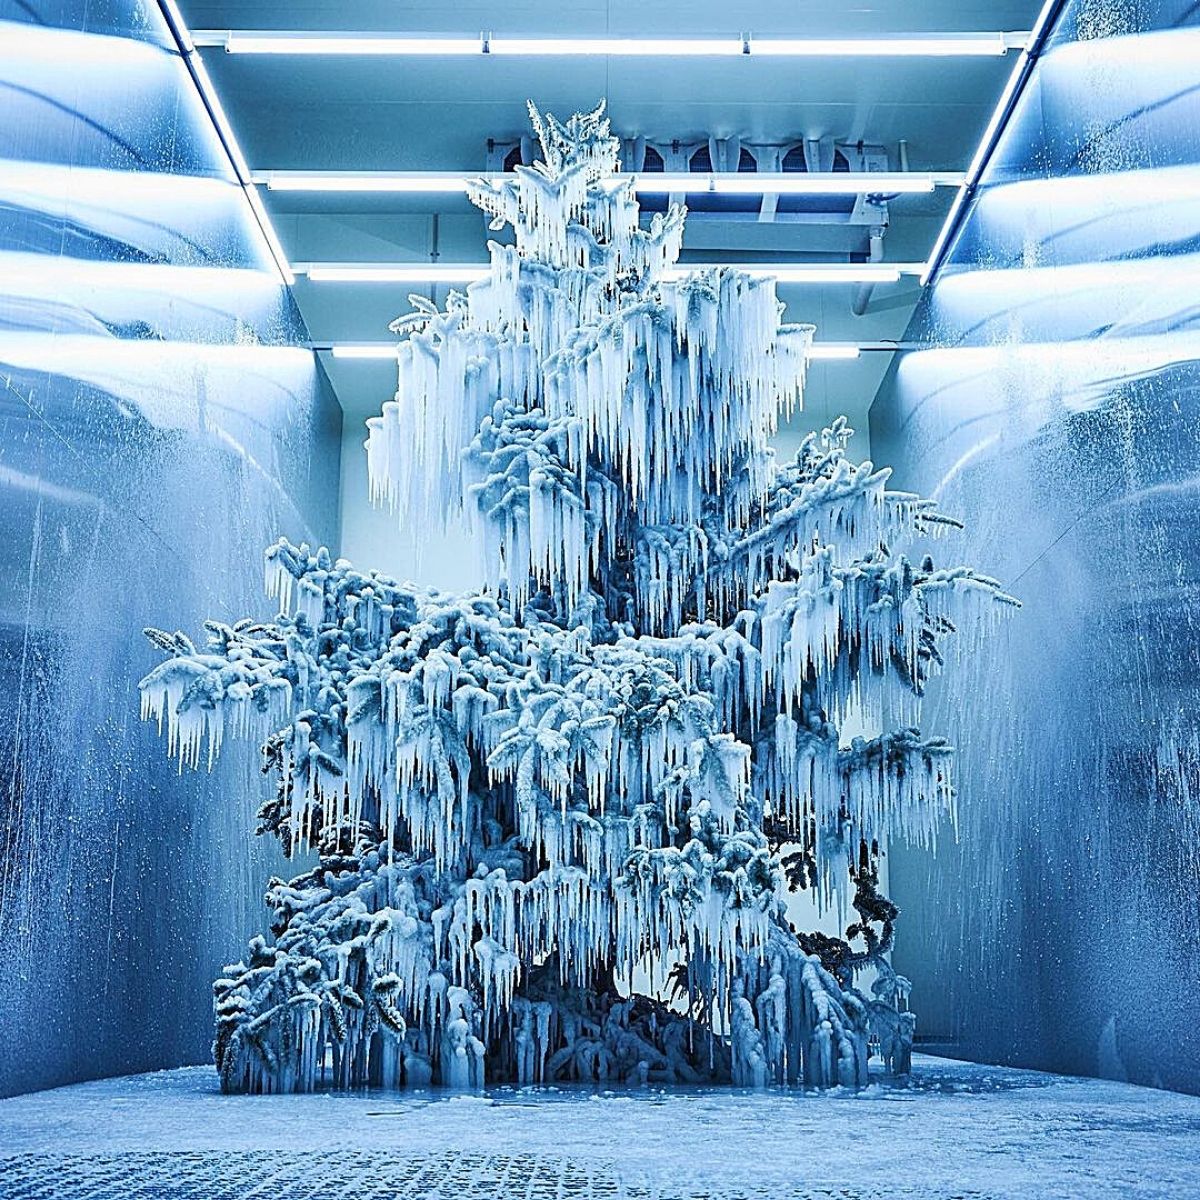 Azuma Makoto's Frozen Tree - Get Bedazzled by the Beauty of This Recycled Christmas Tree